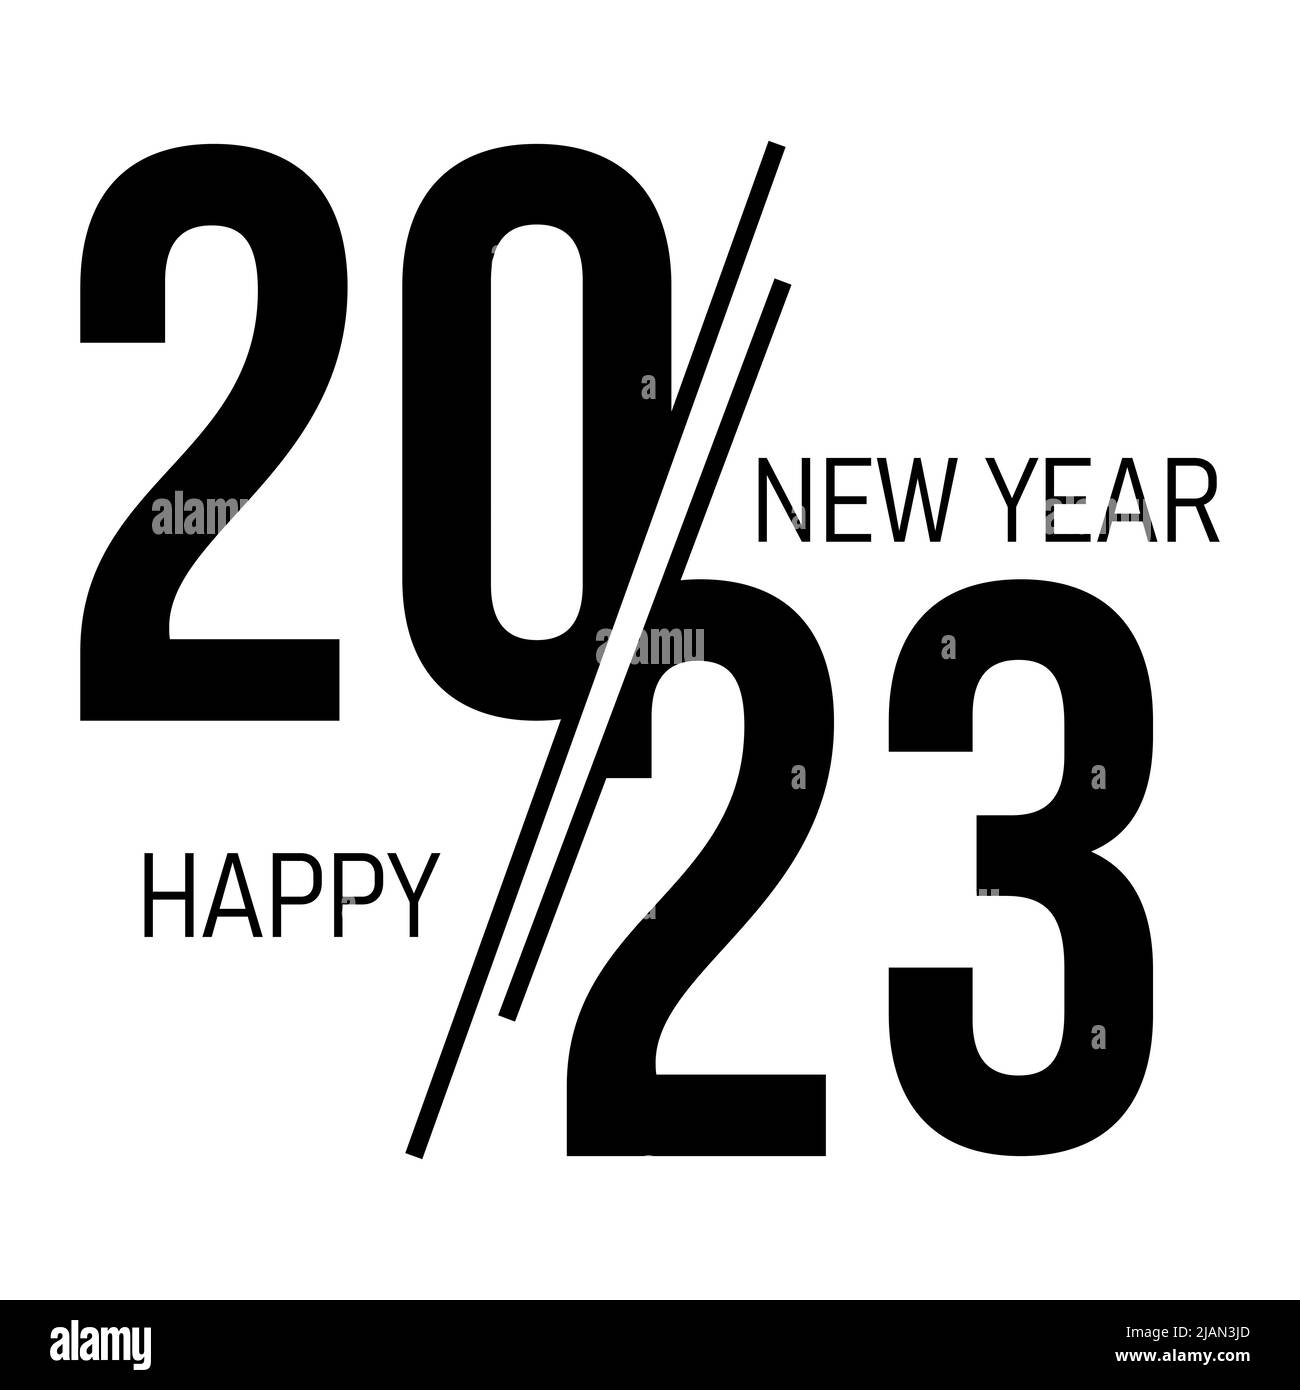 2023-happy-new-year-logo-text-design-2023-design-template-black-and